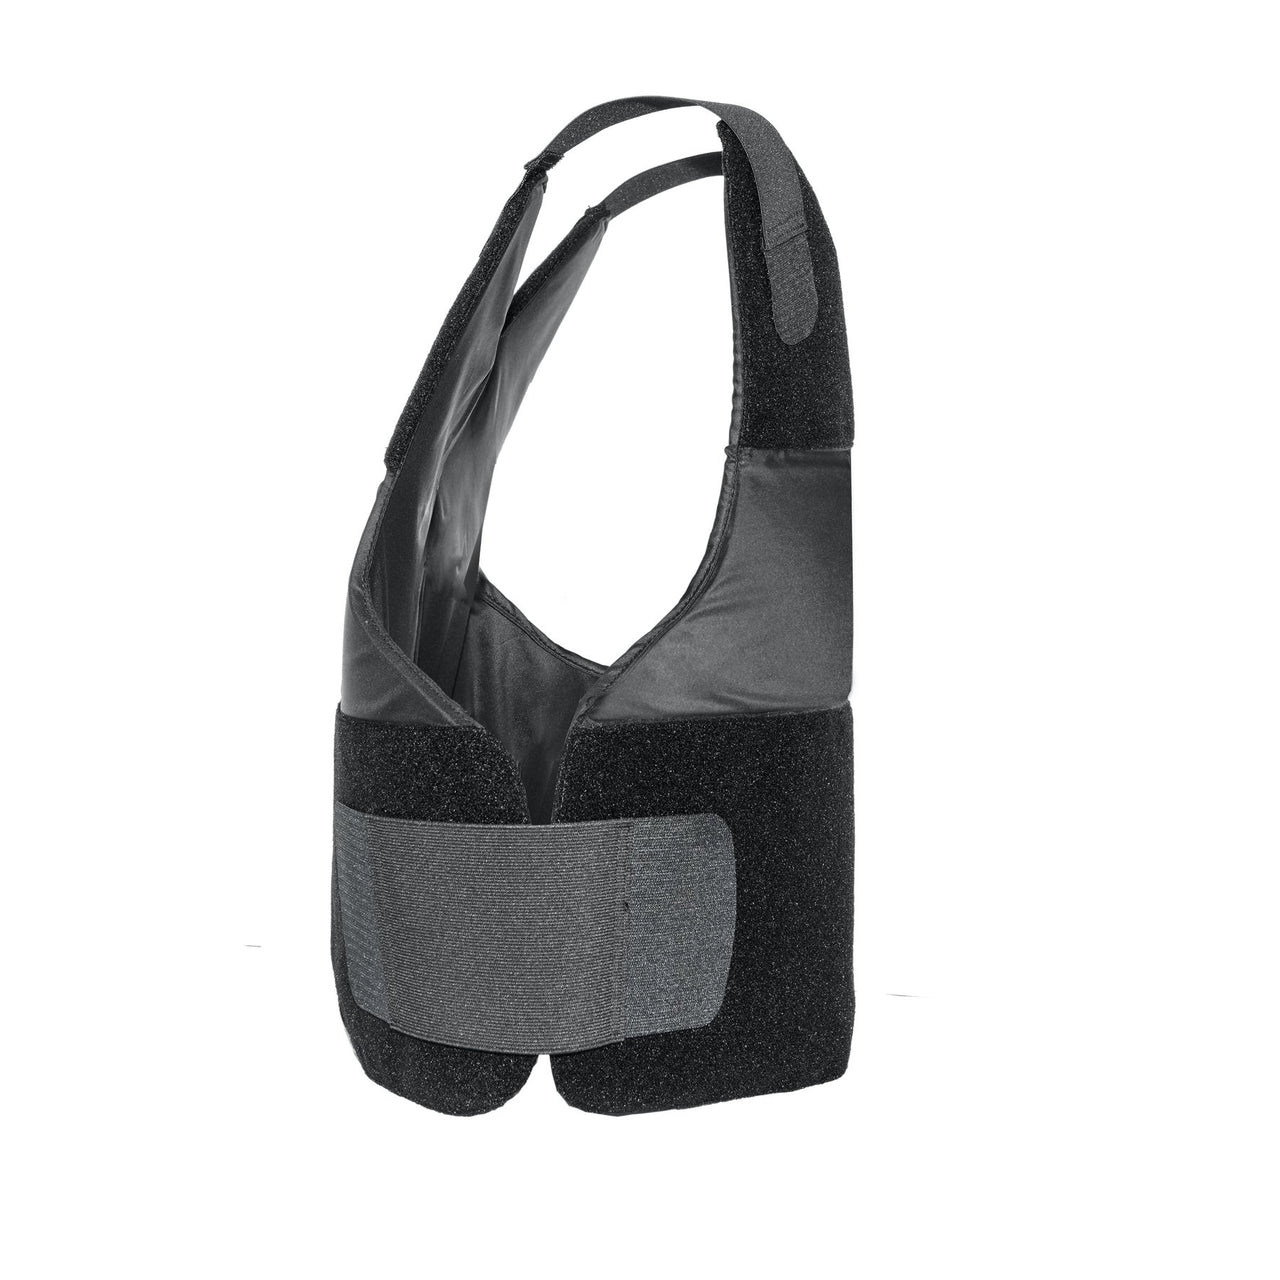 A black and gray Body Armor Direct Freedom Concealable Carrier vest with a strap on it.